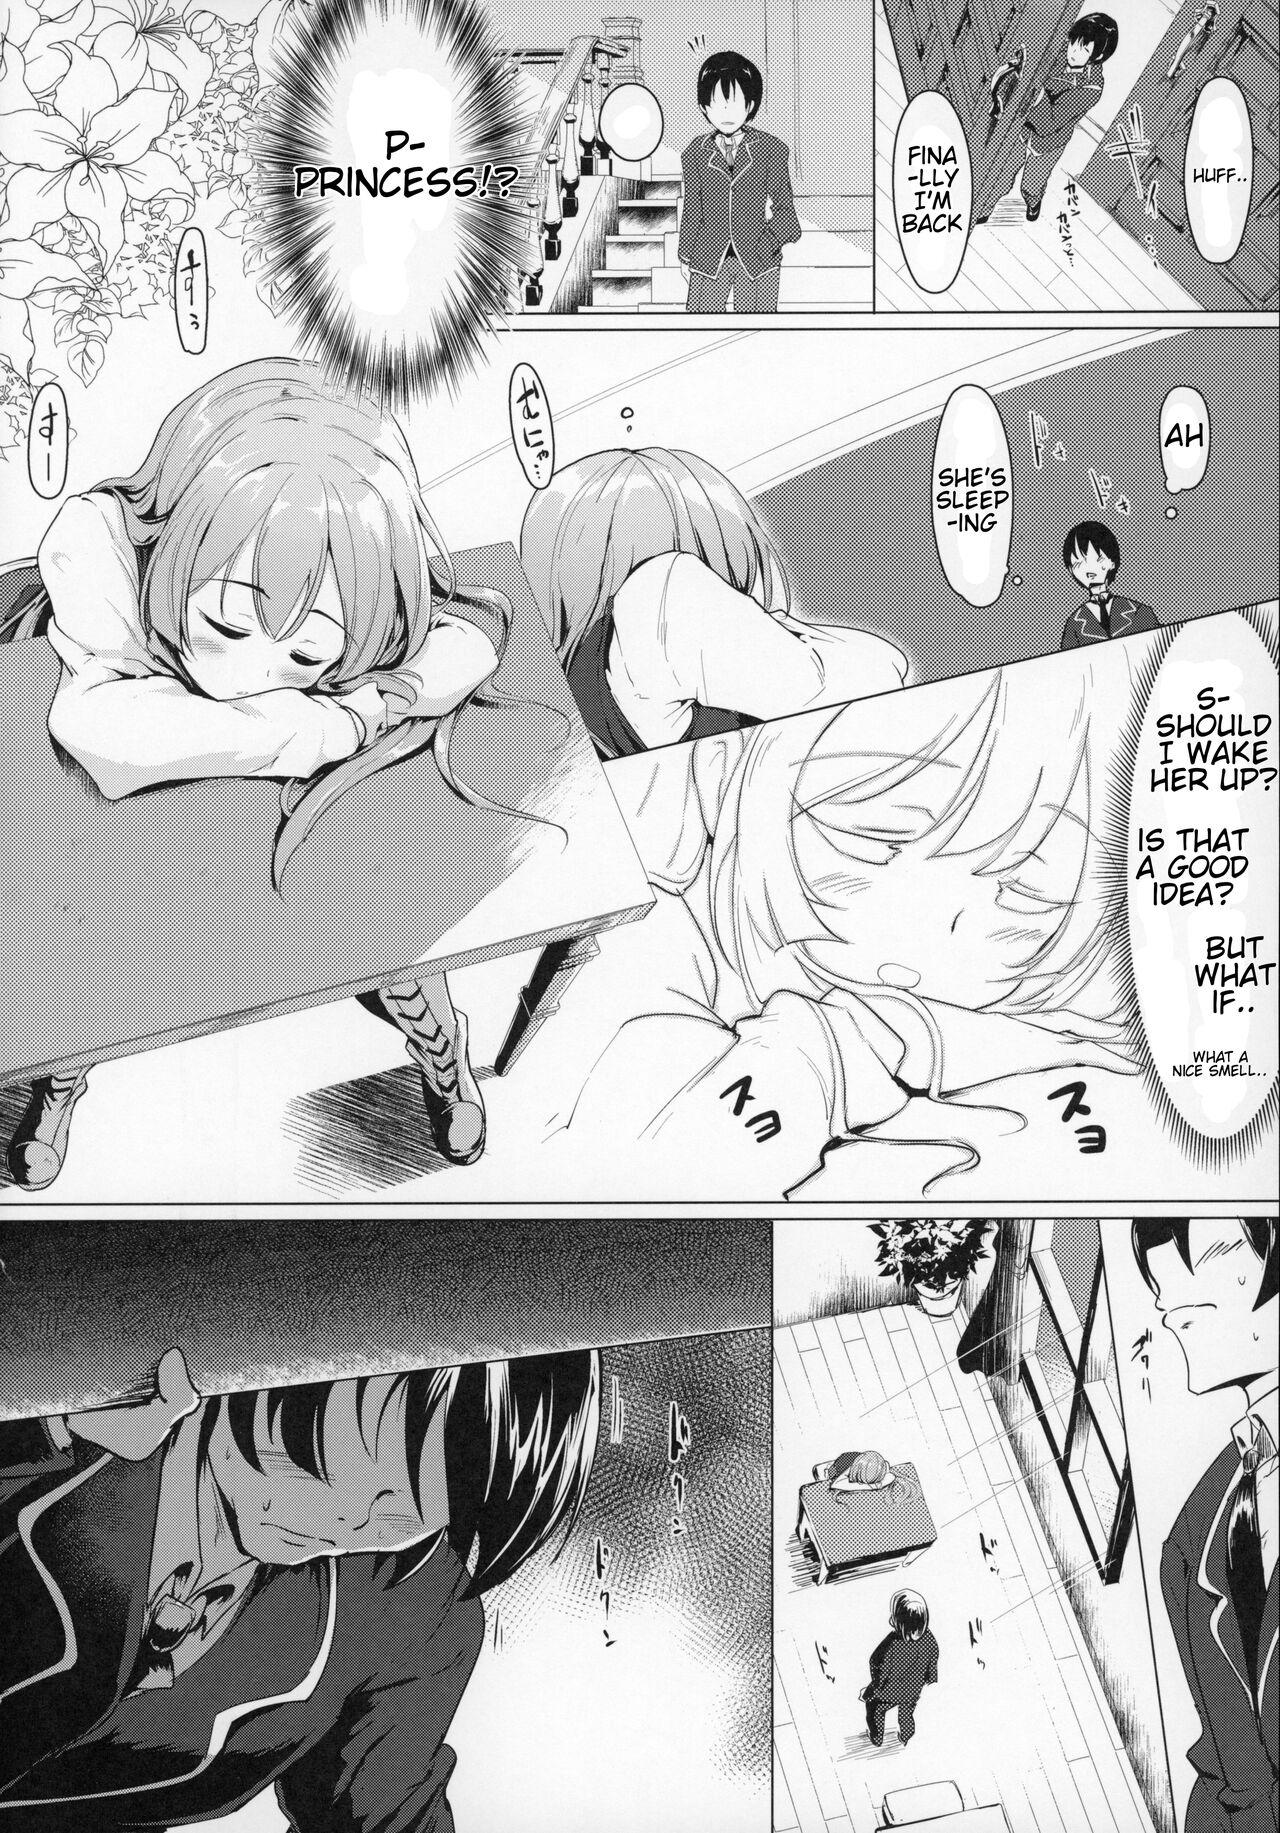 Fat There's No Way An Ecchi Event Will Happen Between Me and the Princess of Manaria Kingdom! - Manaria friends Foda - Page 7